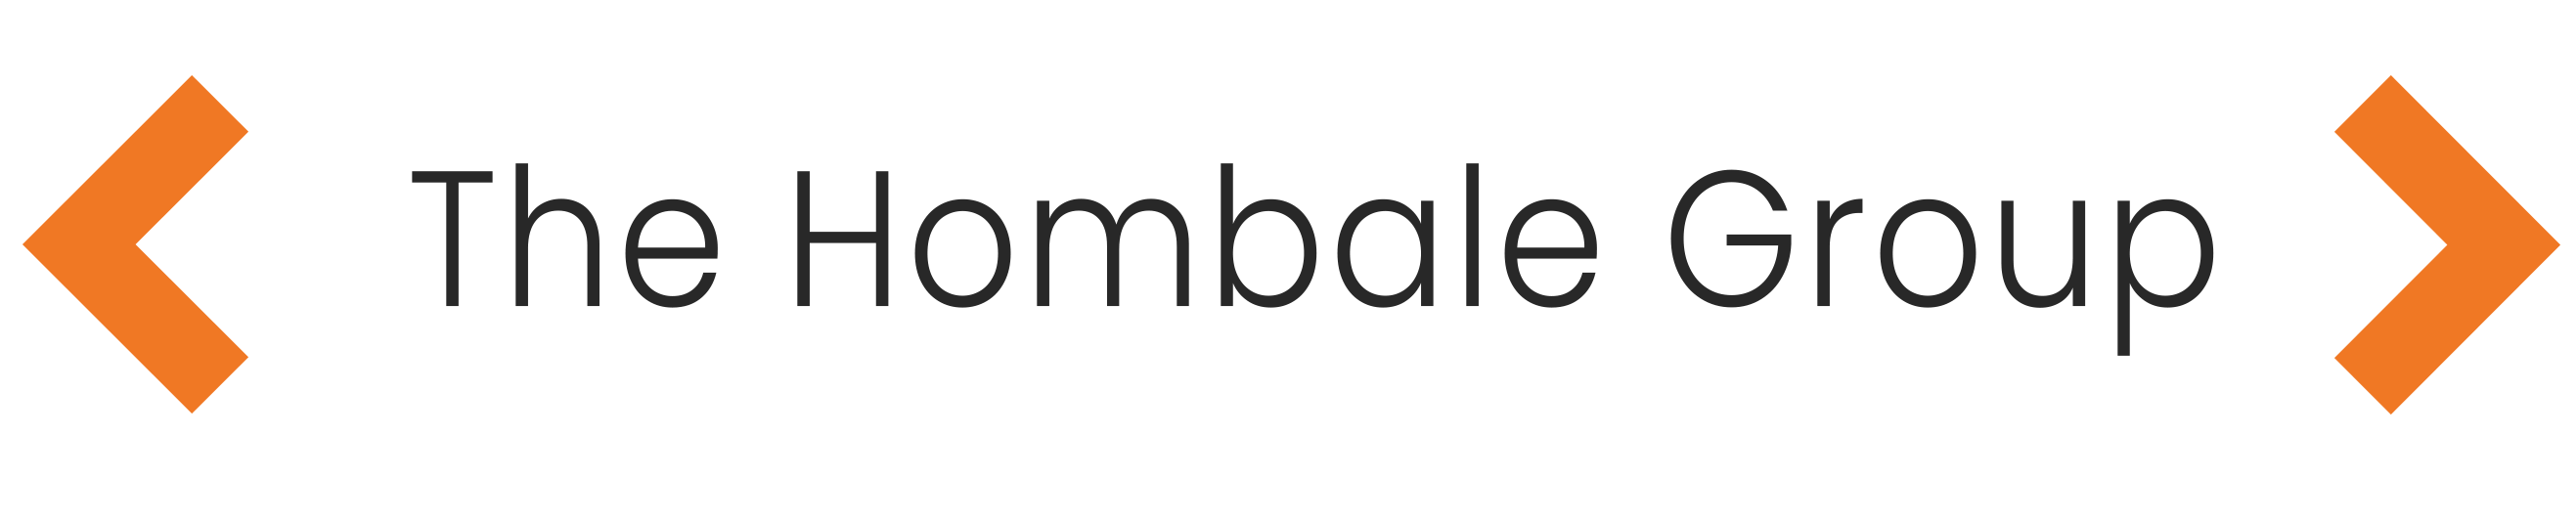 The Hombale Groups